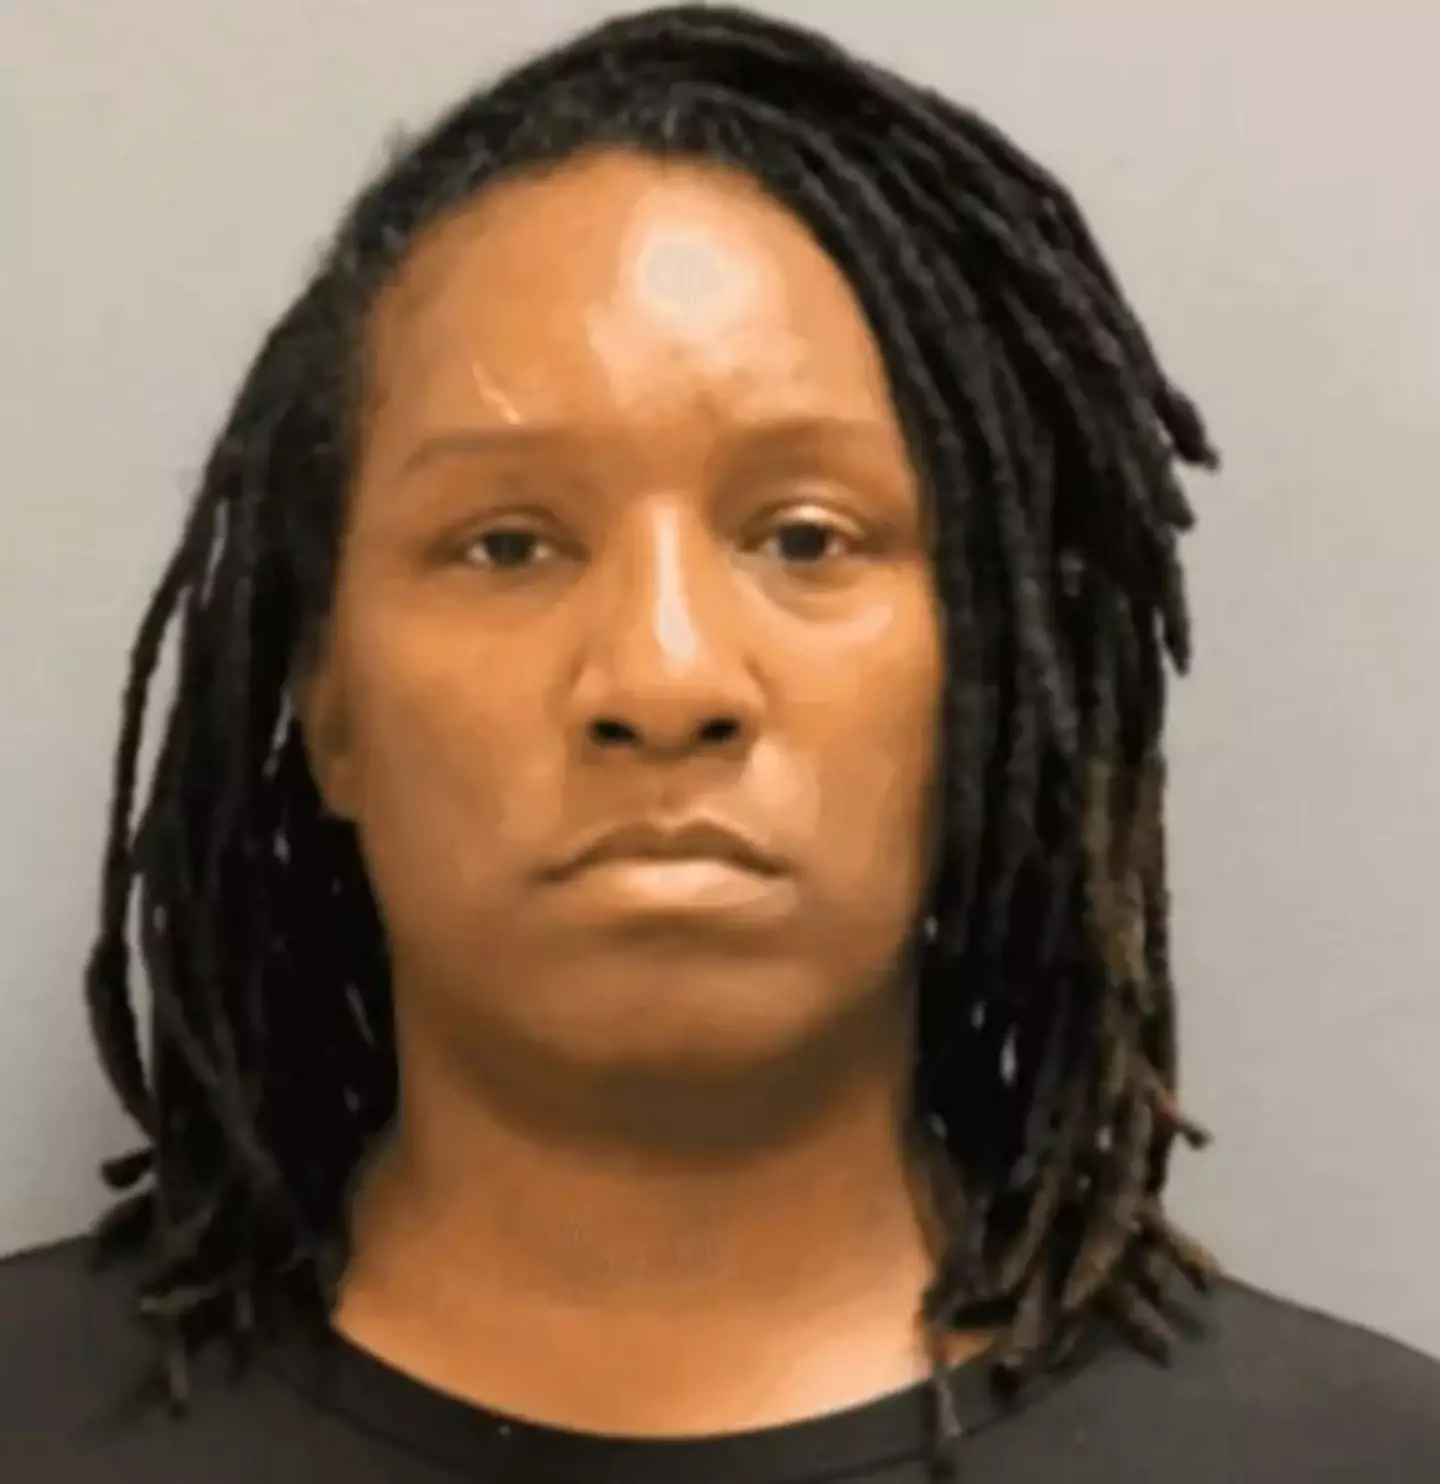 Carlishia Hood was arrested after the altercation.